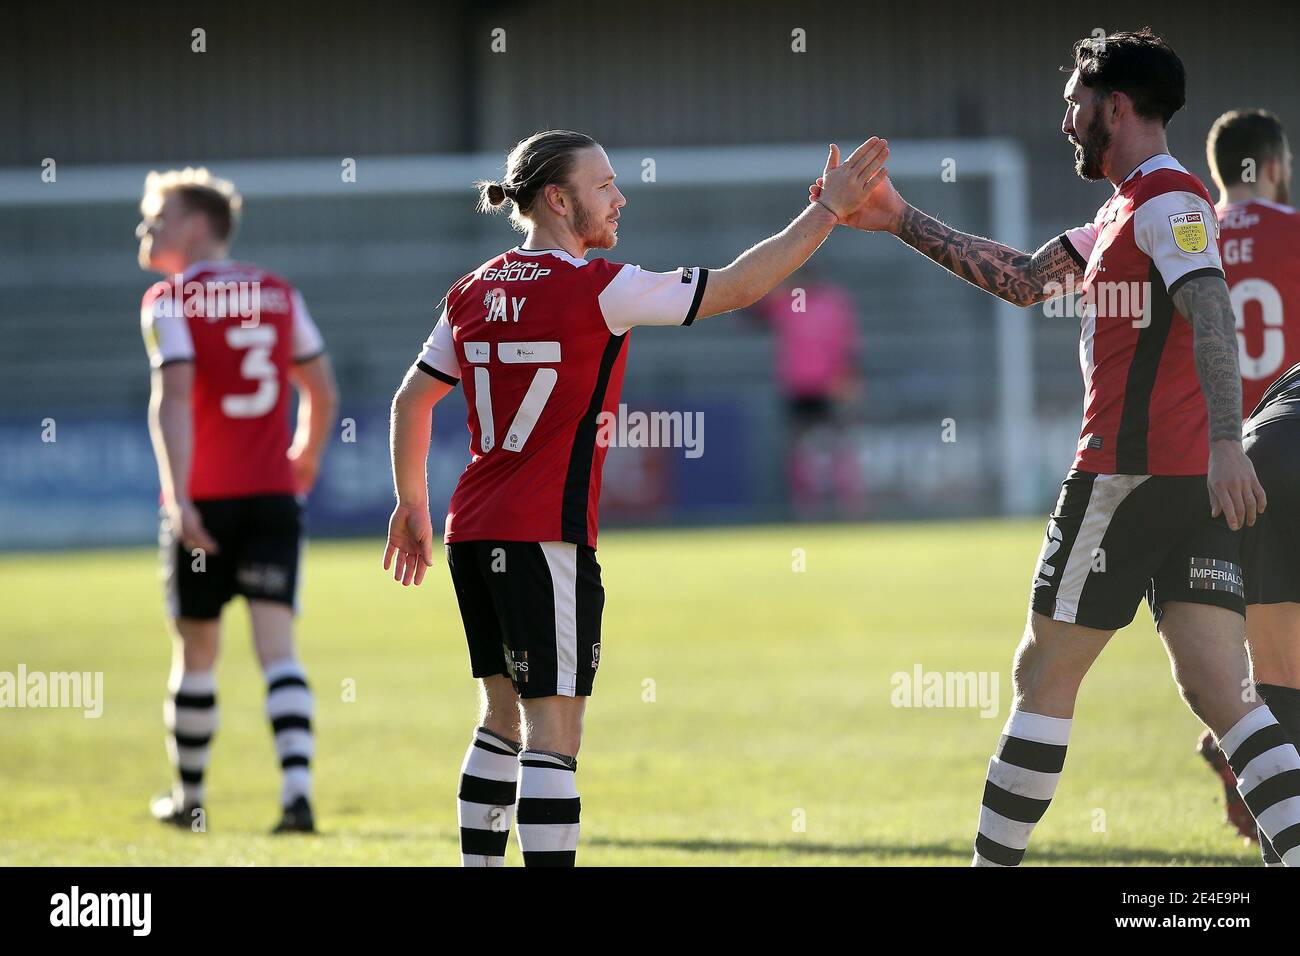 Exeter, UK. 23rd Jan, 2021. Scorers Matt Jay of Exeter City and Ryan Bowman of Exeter City celebrate during the Sky Bet League 2 behind closed doors match between Exeter City and Stevenage at St James' Park, Exeter, England on 23 January 2021. Photo by Dave Peters/PRiME Media Images. Credit: PRiME Media Images/Alamy Live News Stock Photo